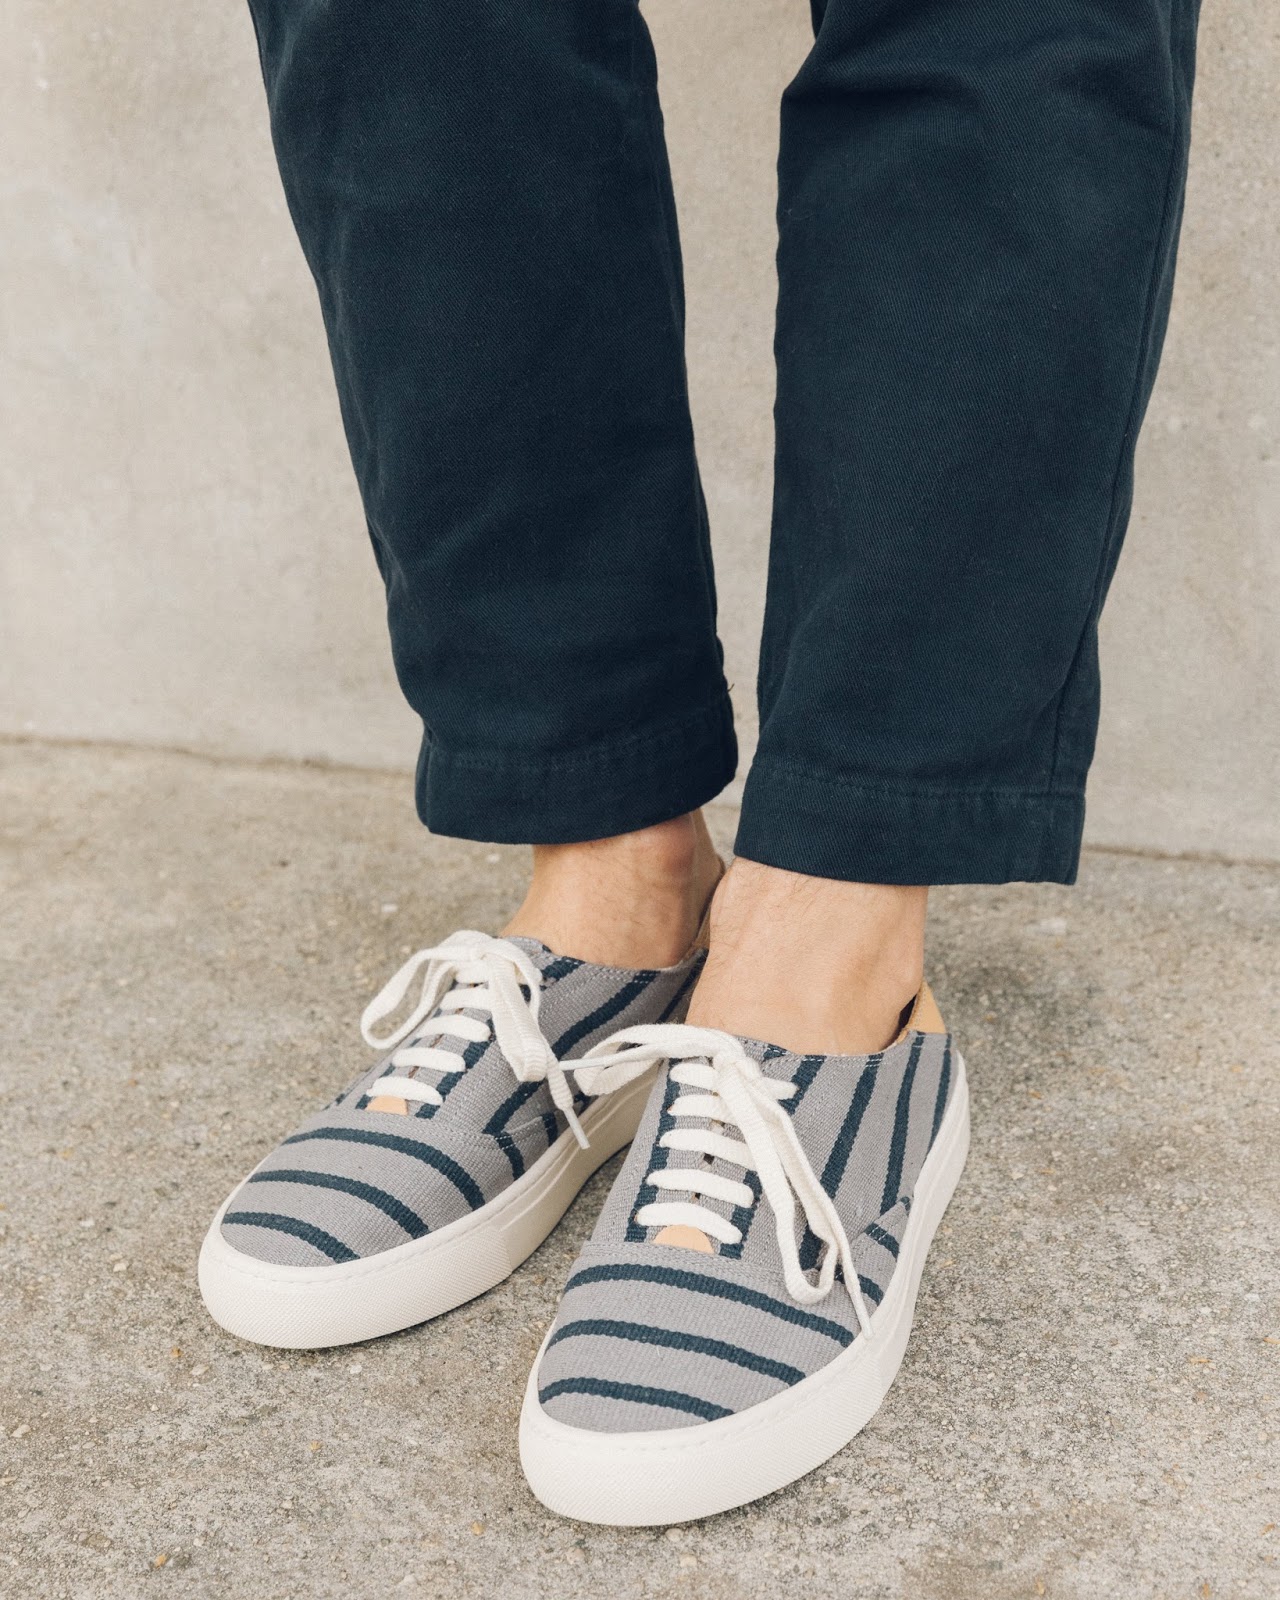 Comfortably Convertible: Soludos Striped Convertible Sneaker | SHOEOGRAPHY